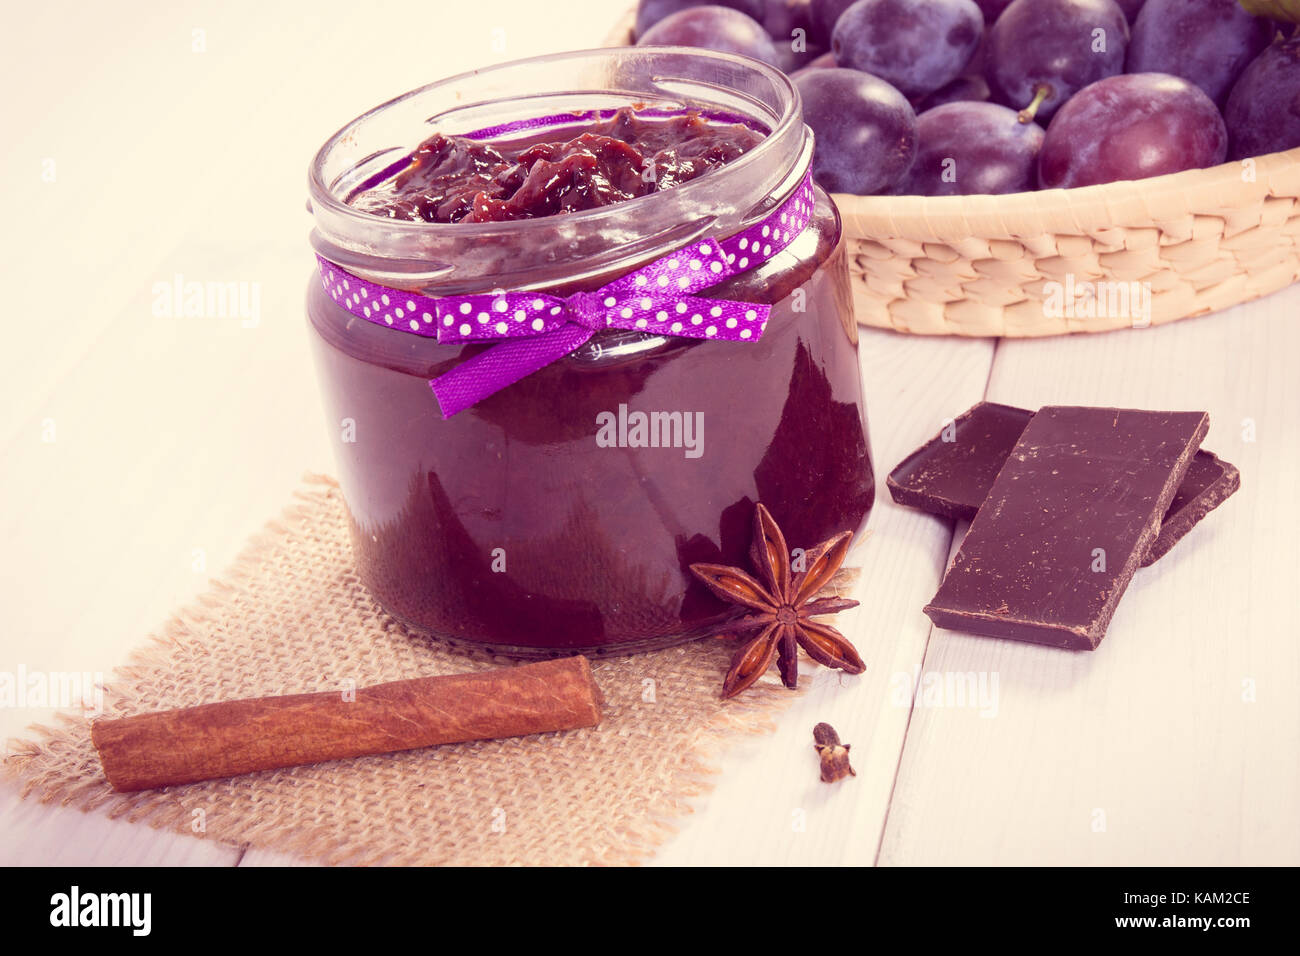 Vintage photo, Fresh plum jam or marmalade in glass jar, ripe fruits and chocolate, concept of healthy sweet dessert Stock Photo